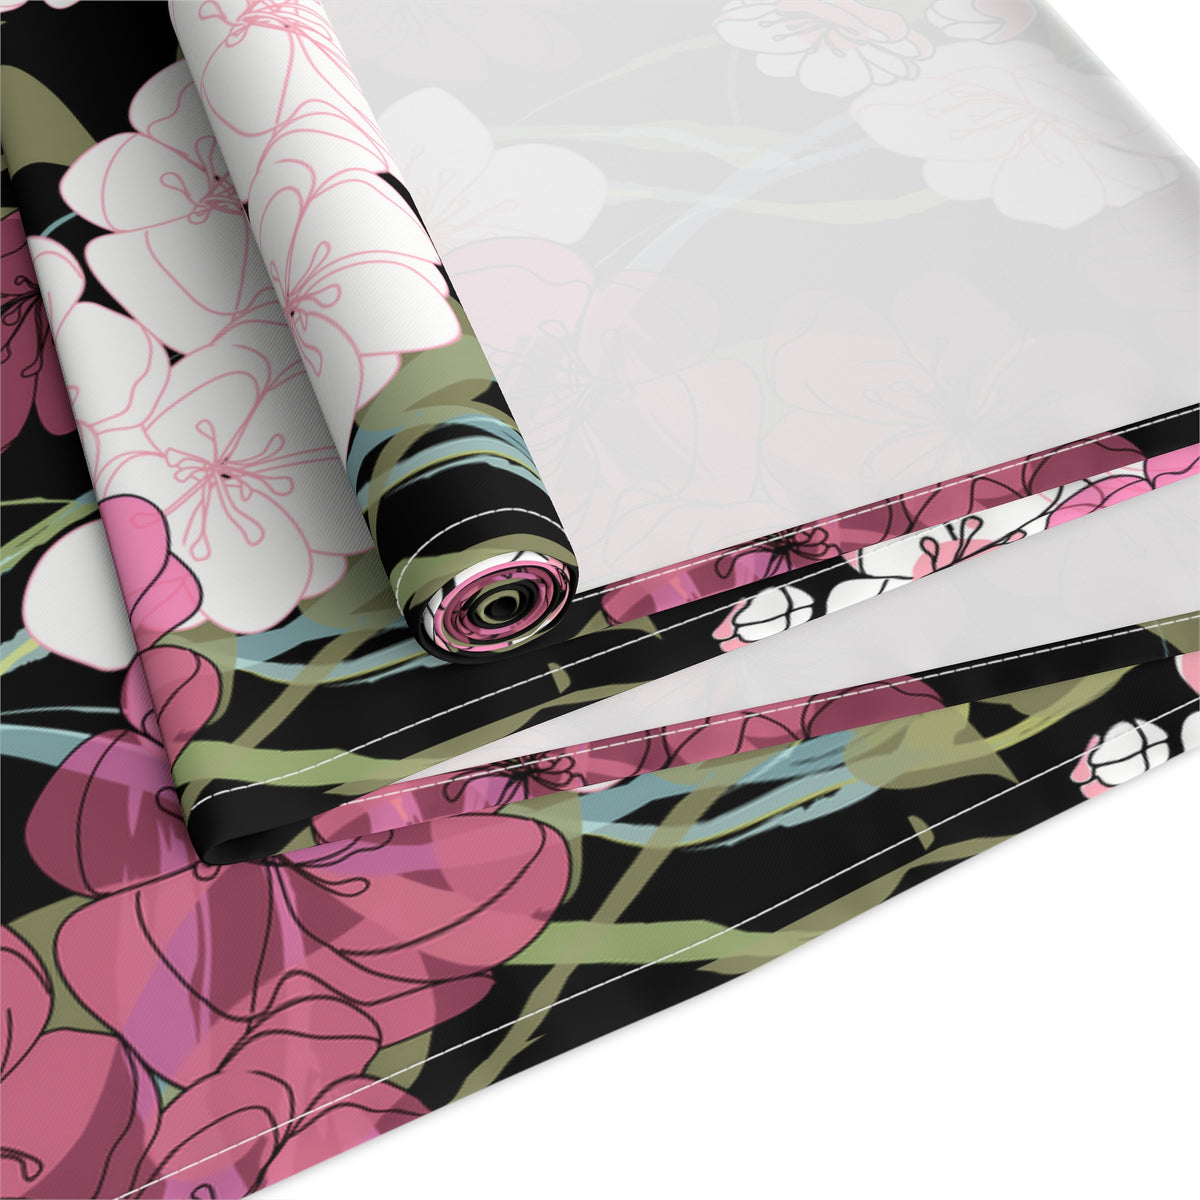 Midnight Table Runner with Cherry Blossom Floral Pattern (16&quot; × 72&quot;)